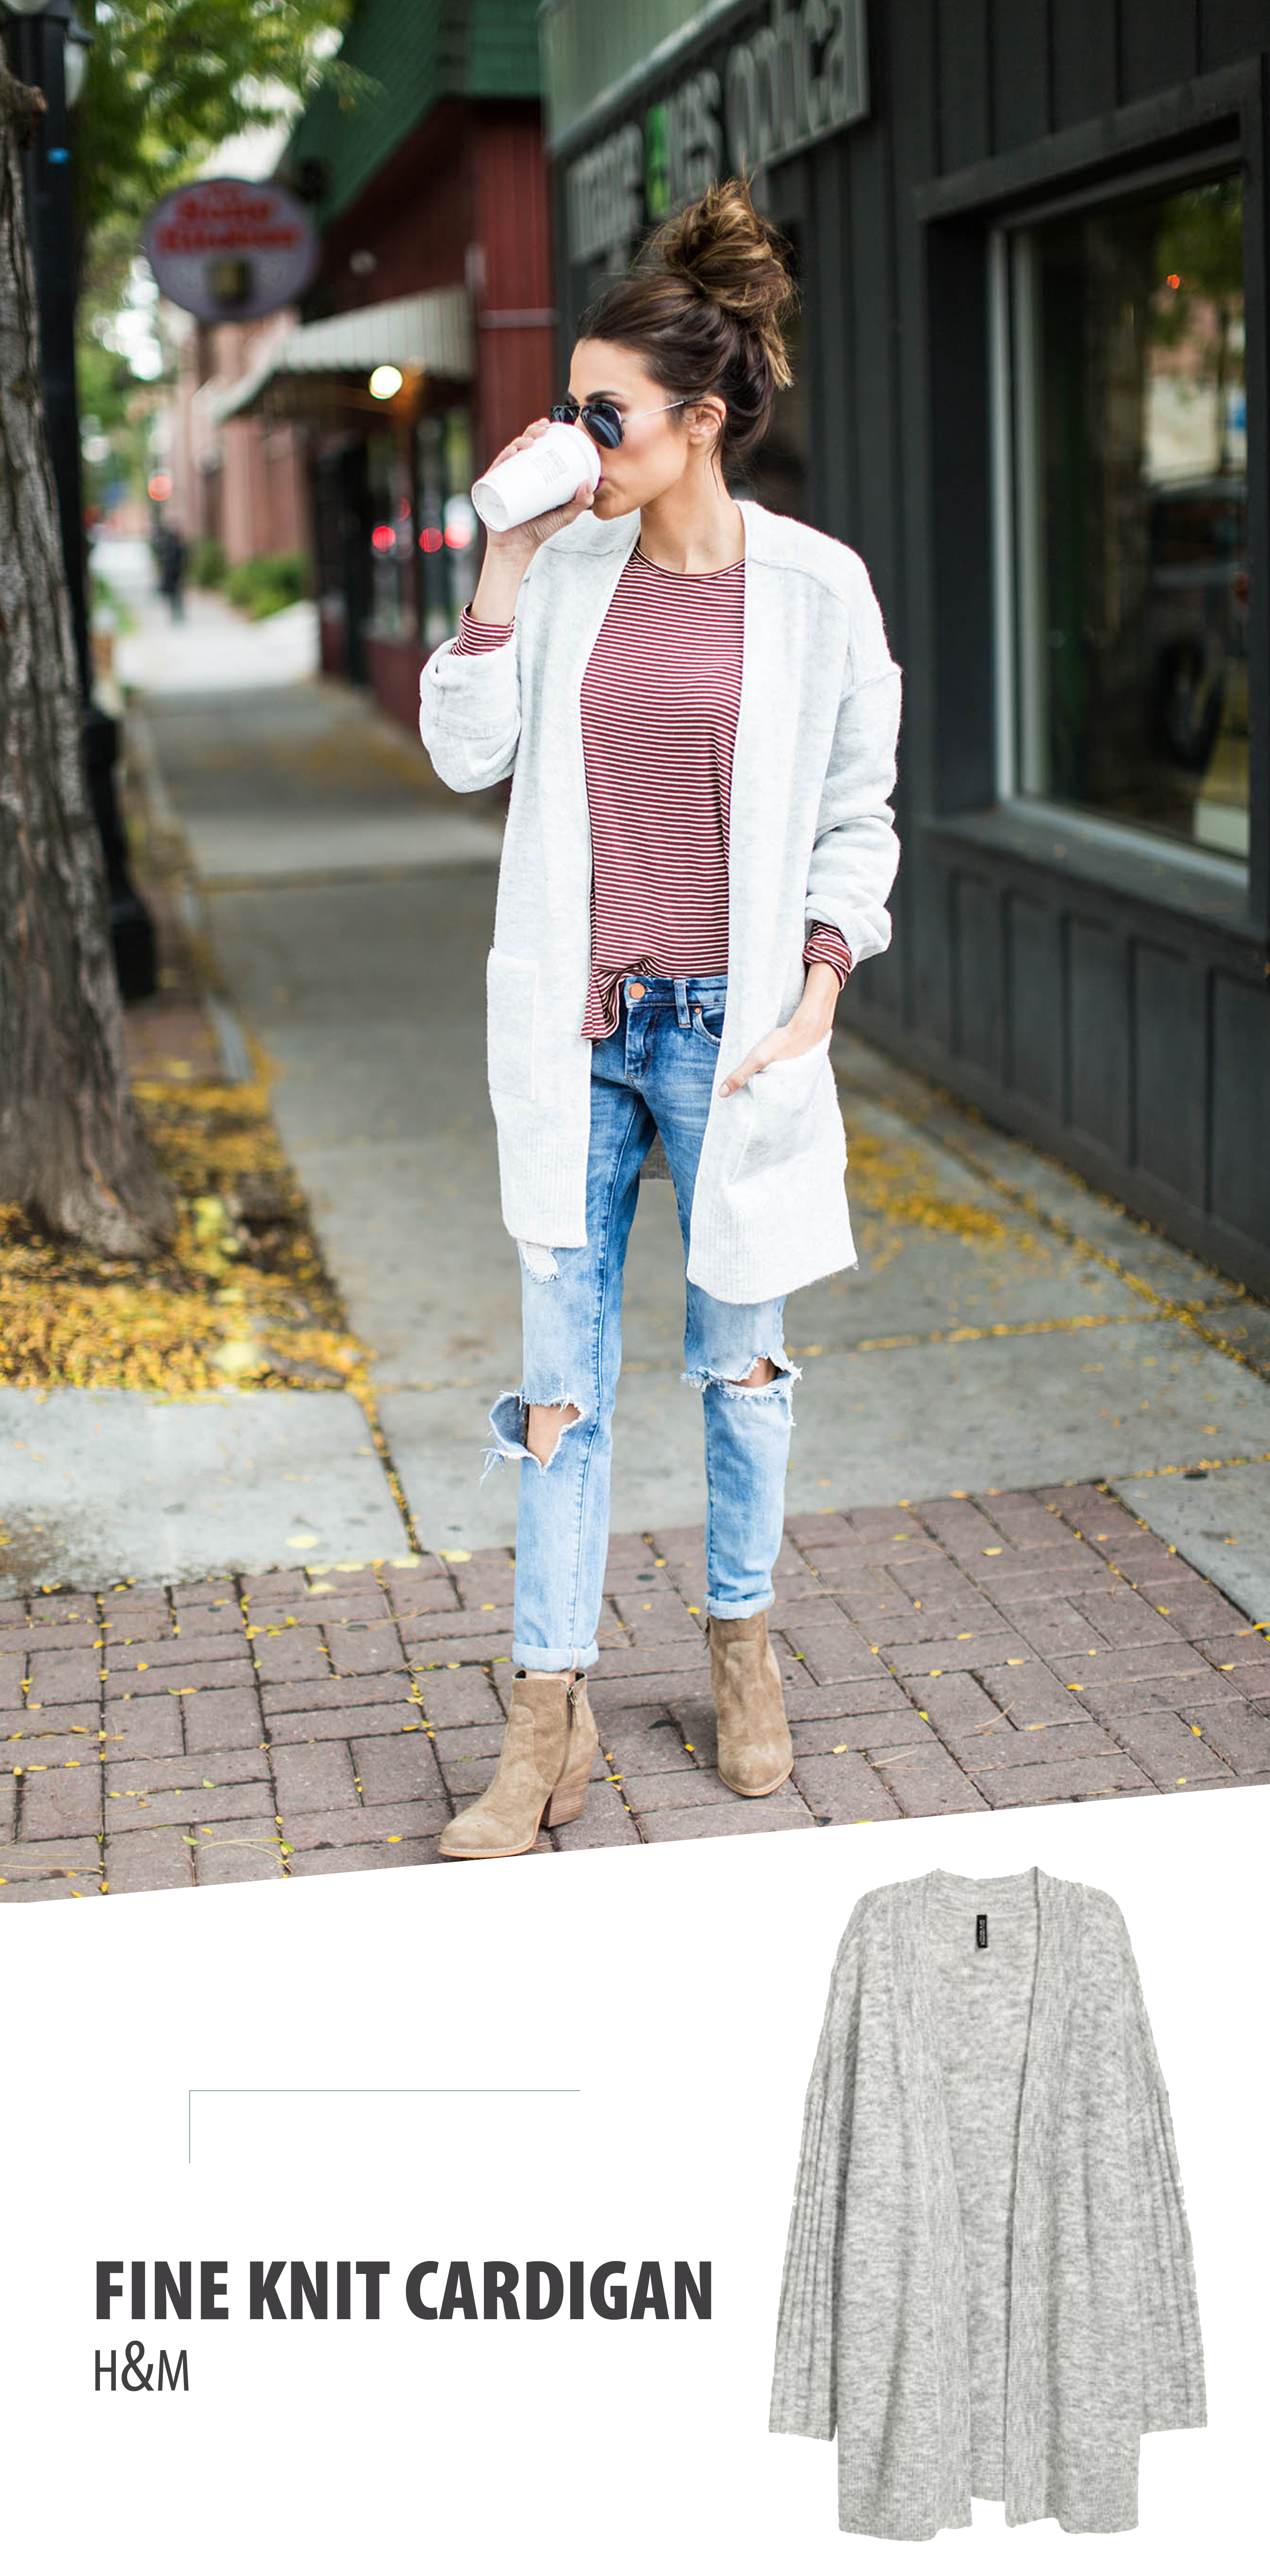 How to style extra long cardigans | Pick your shoes and go with it.